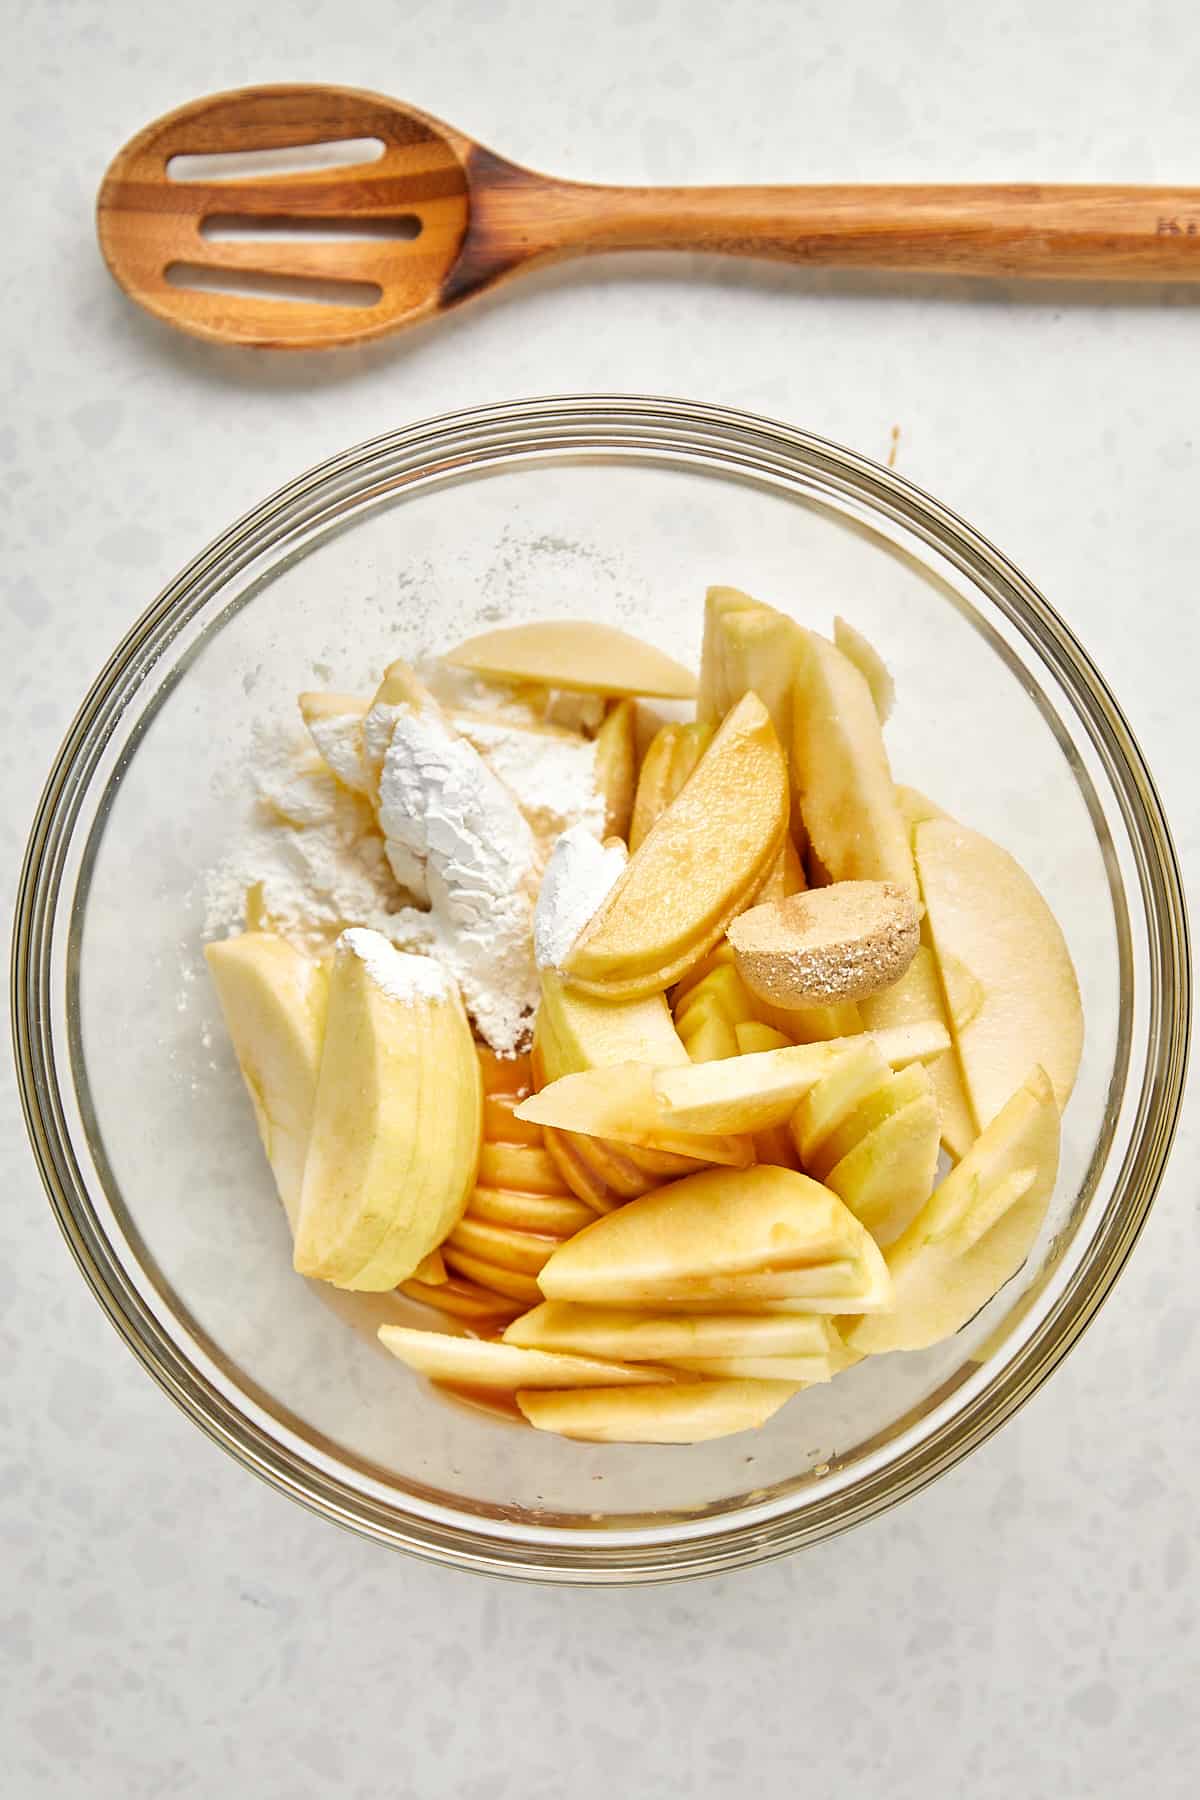 Slices of apples with lemon juice, salted caramel, tapicoa flour, brown sugar, vanilla and salt in a glass bowl.